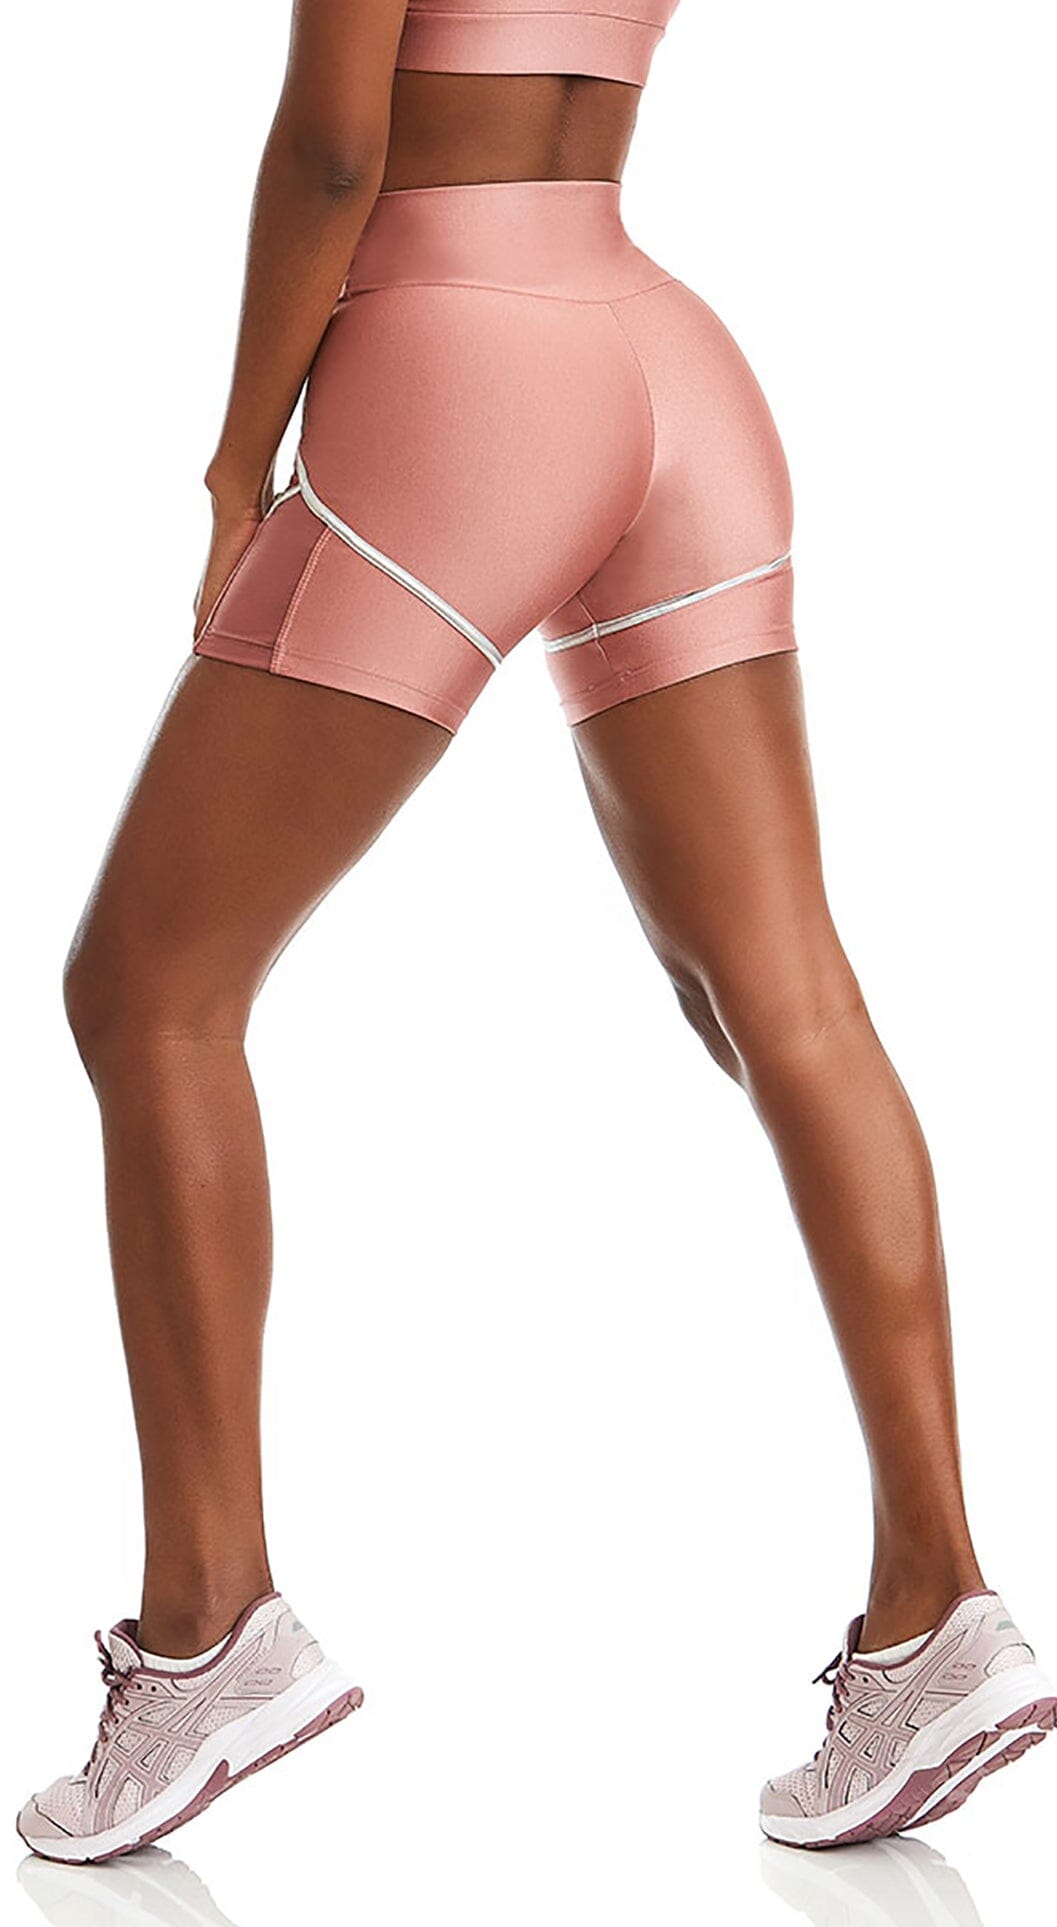 Workout Shorts Holographic - Rose